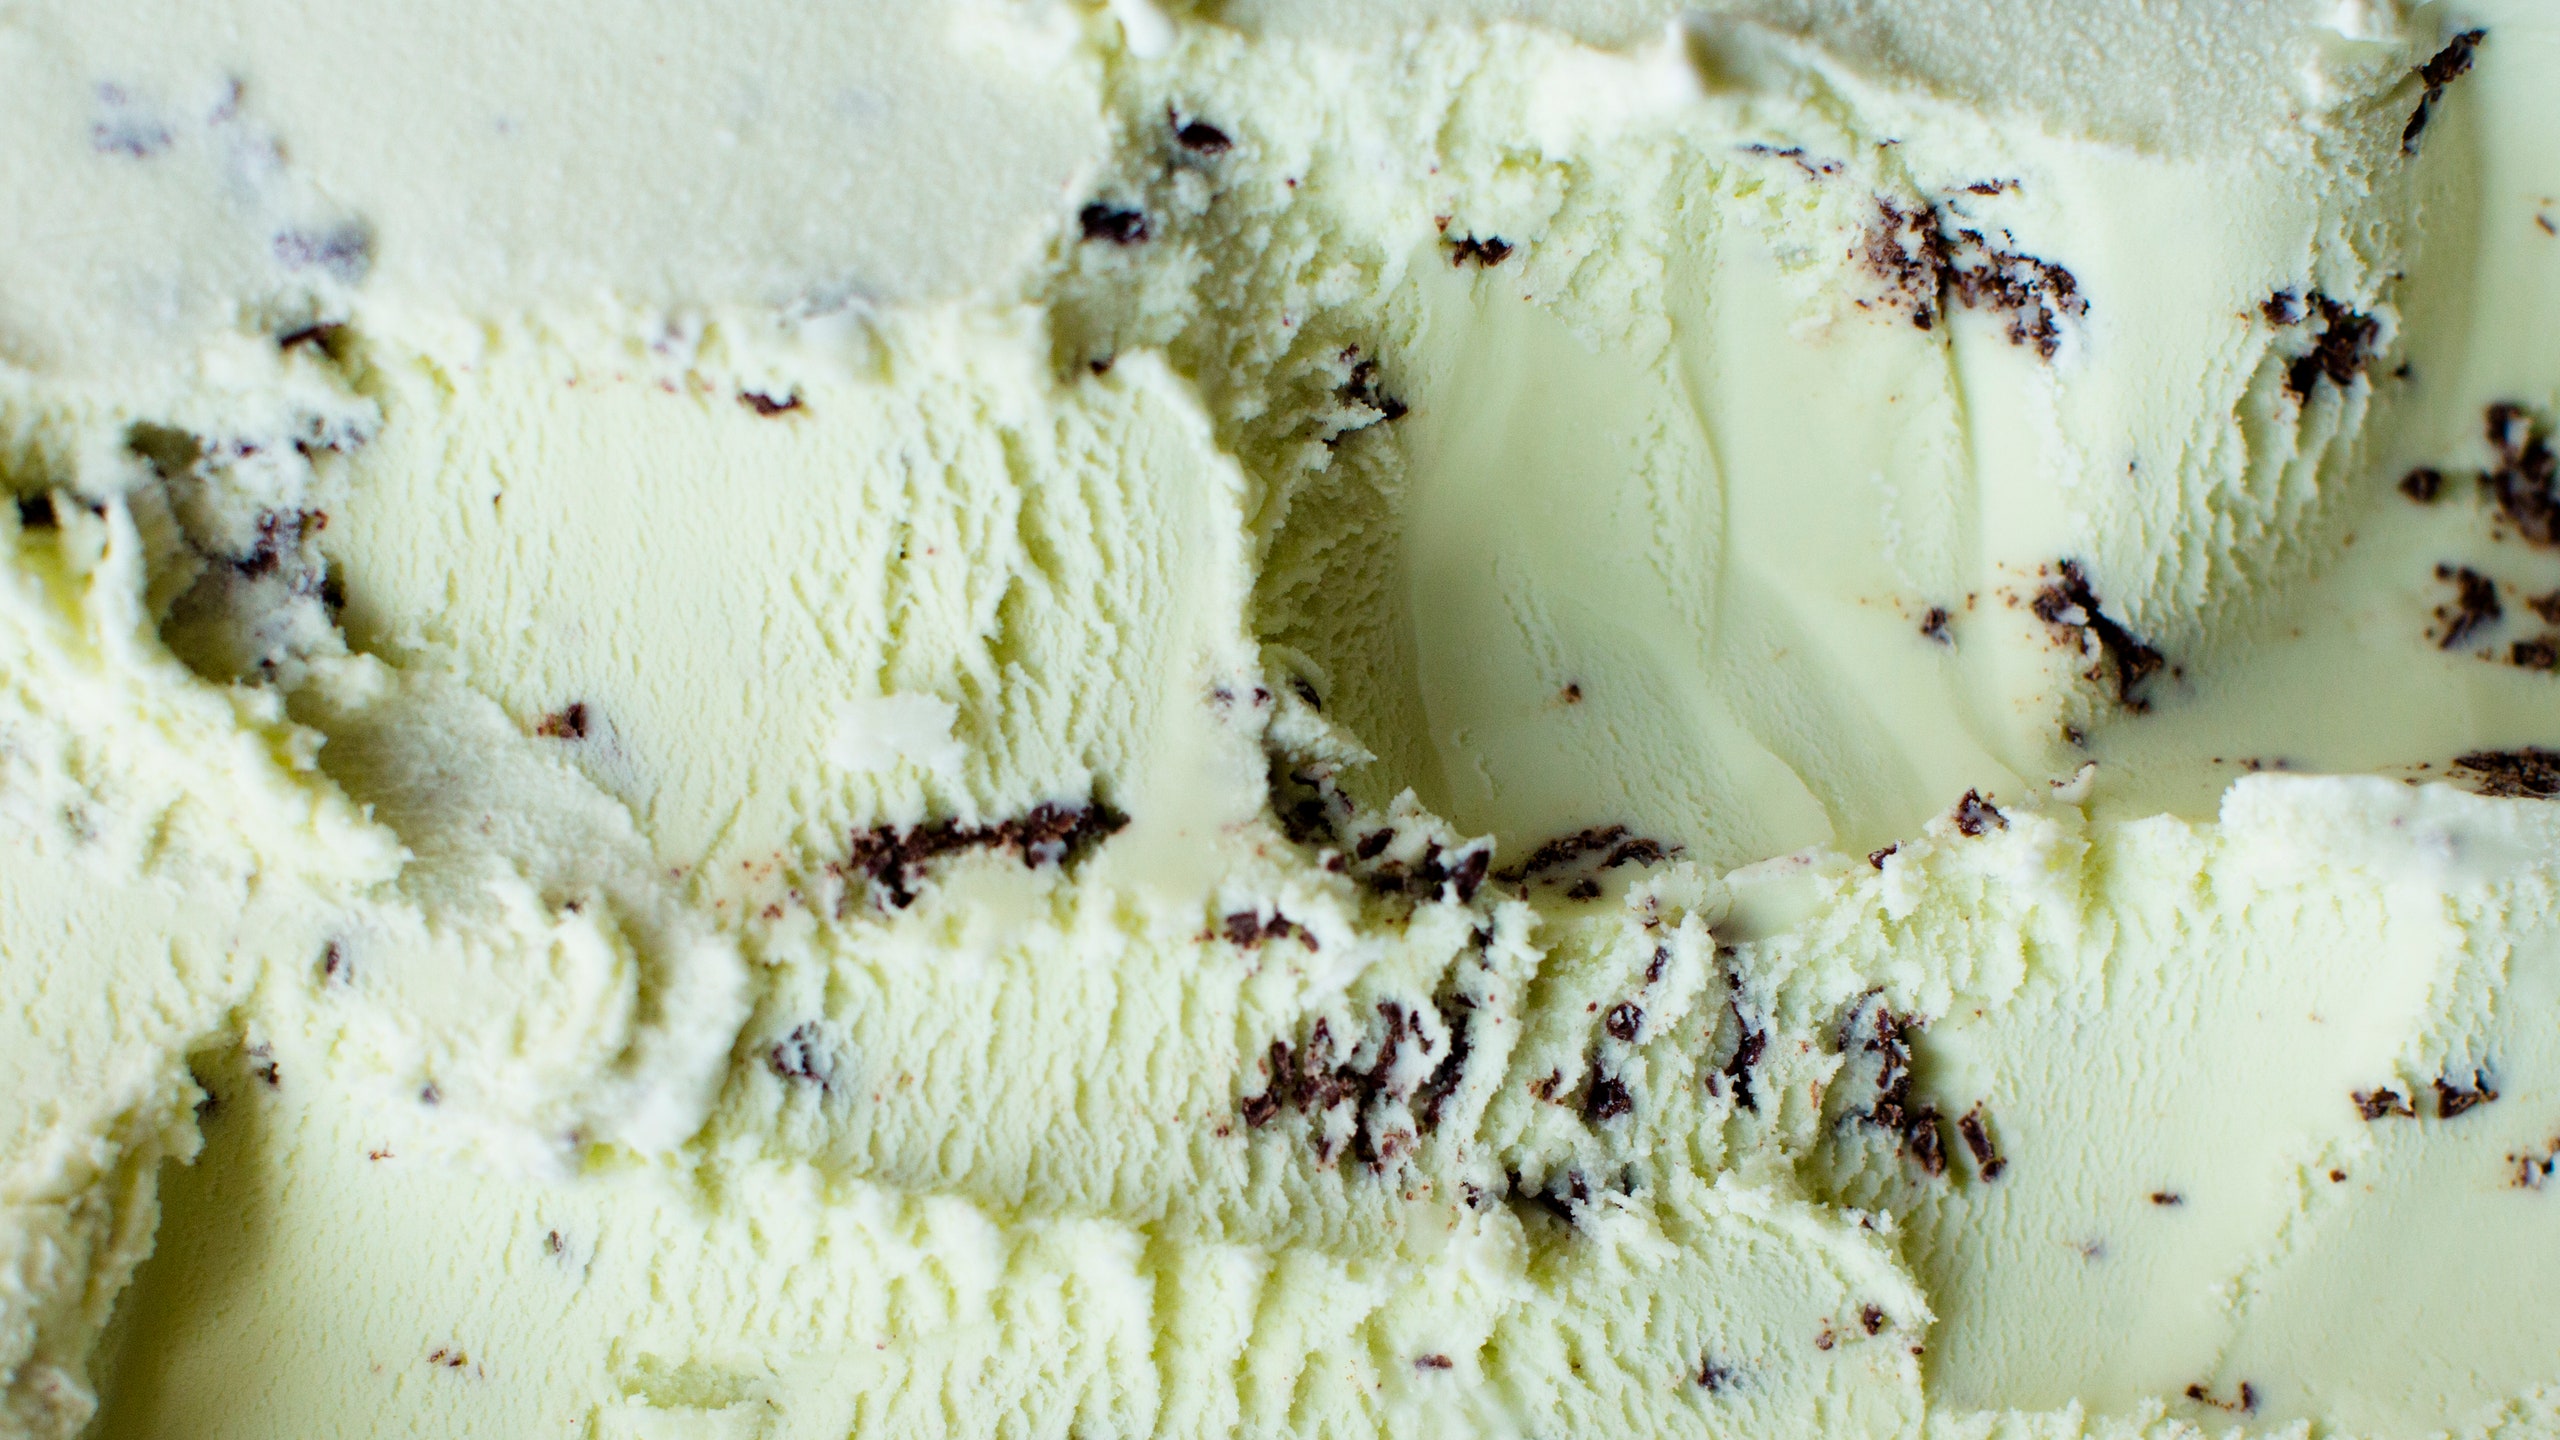 When You Find This Mint Chocolate Chip Ice Cream, Buy 25 Pints. Bon Appétit